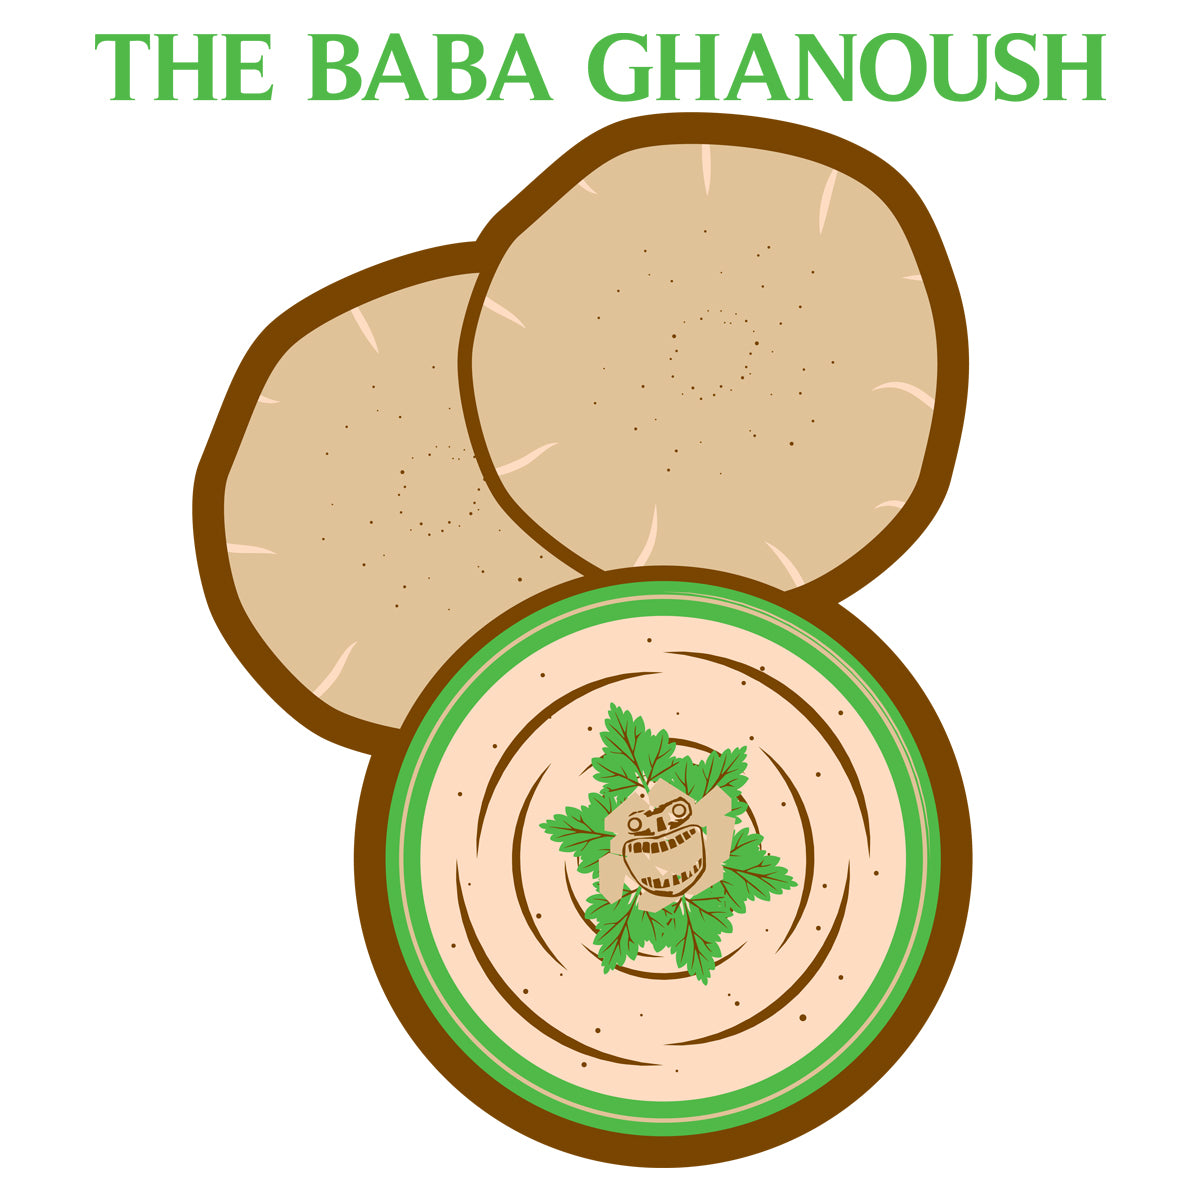 Movie The Food - The Baba Ghanoush - Design Detail